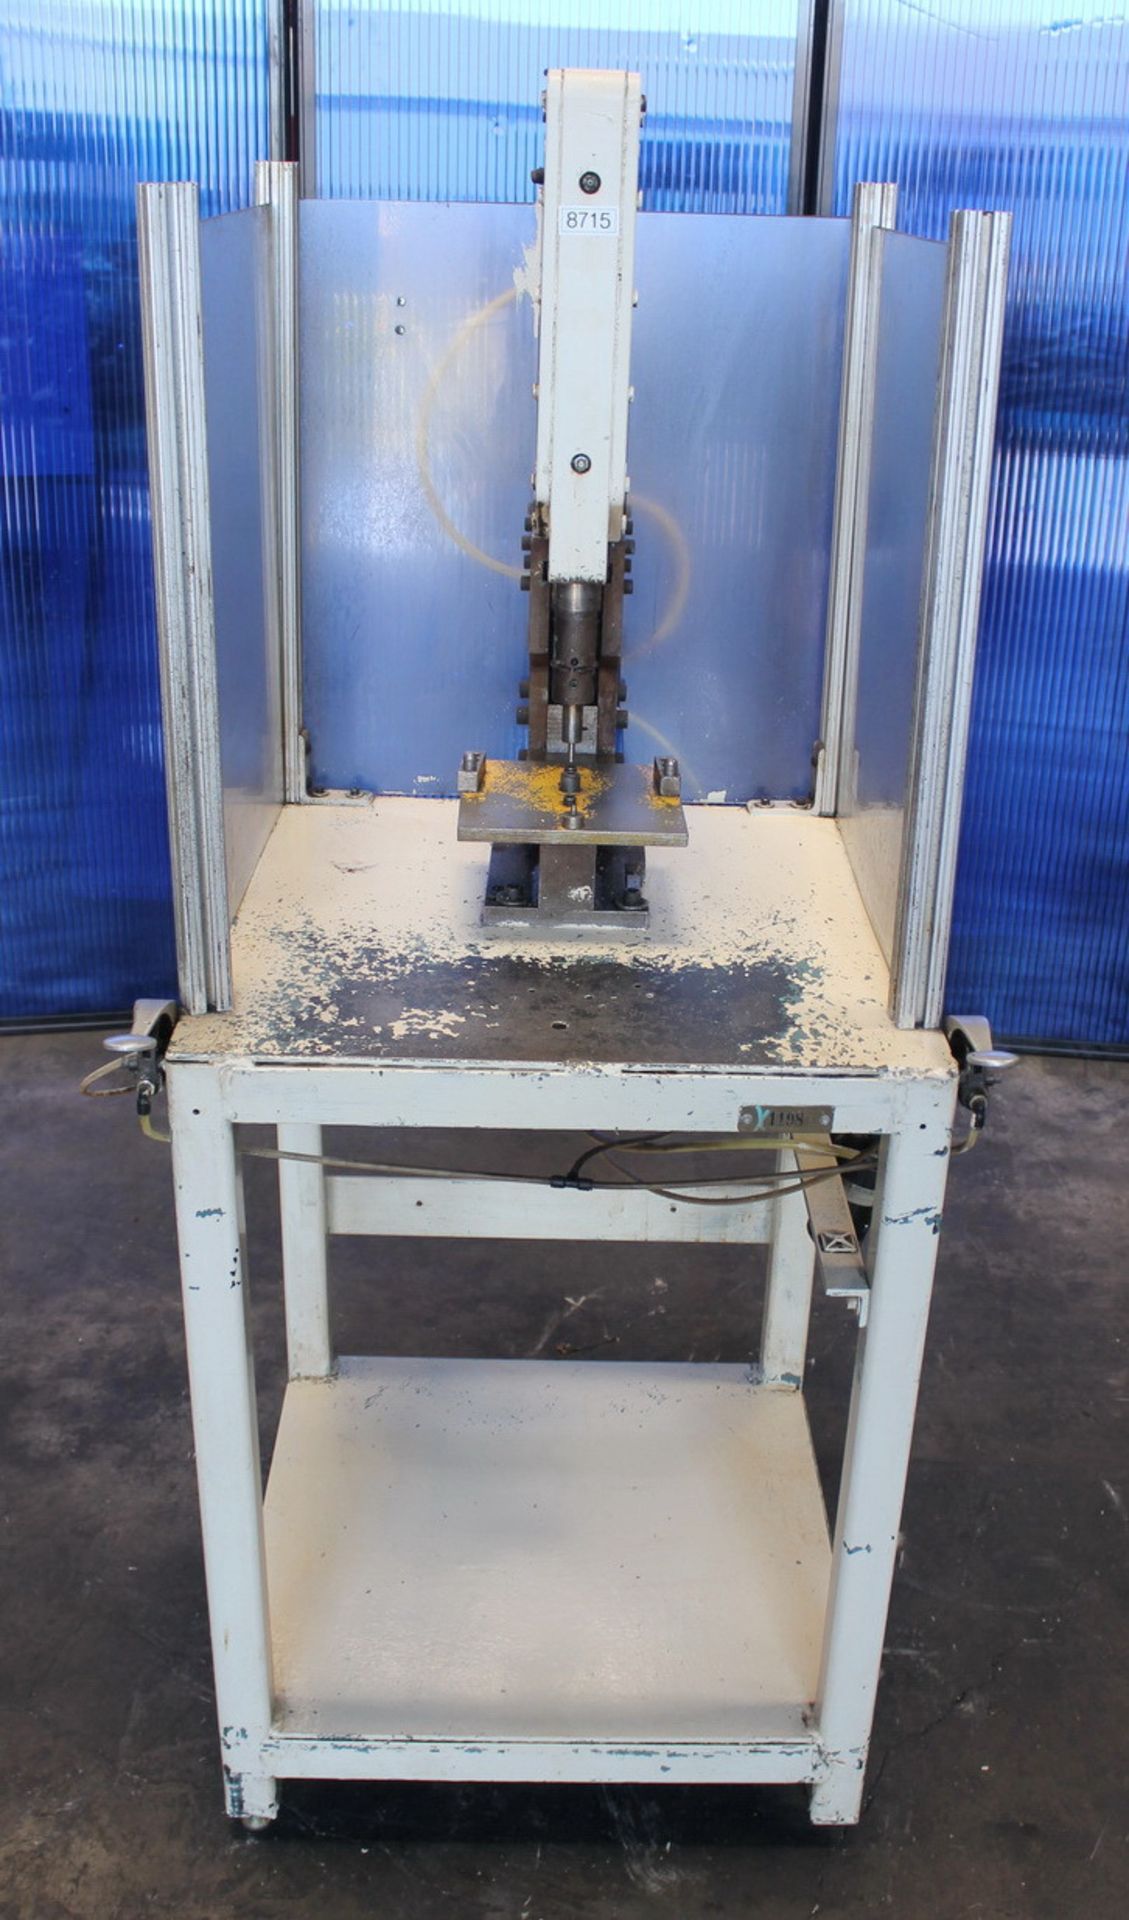 BTM Pneumatic Toggle Punch Press | 5 Ton, Mdl: P5-HX1.5 P-150 - Located In: Huntington Park, CA -